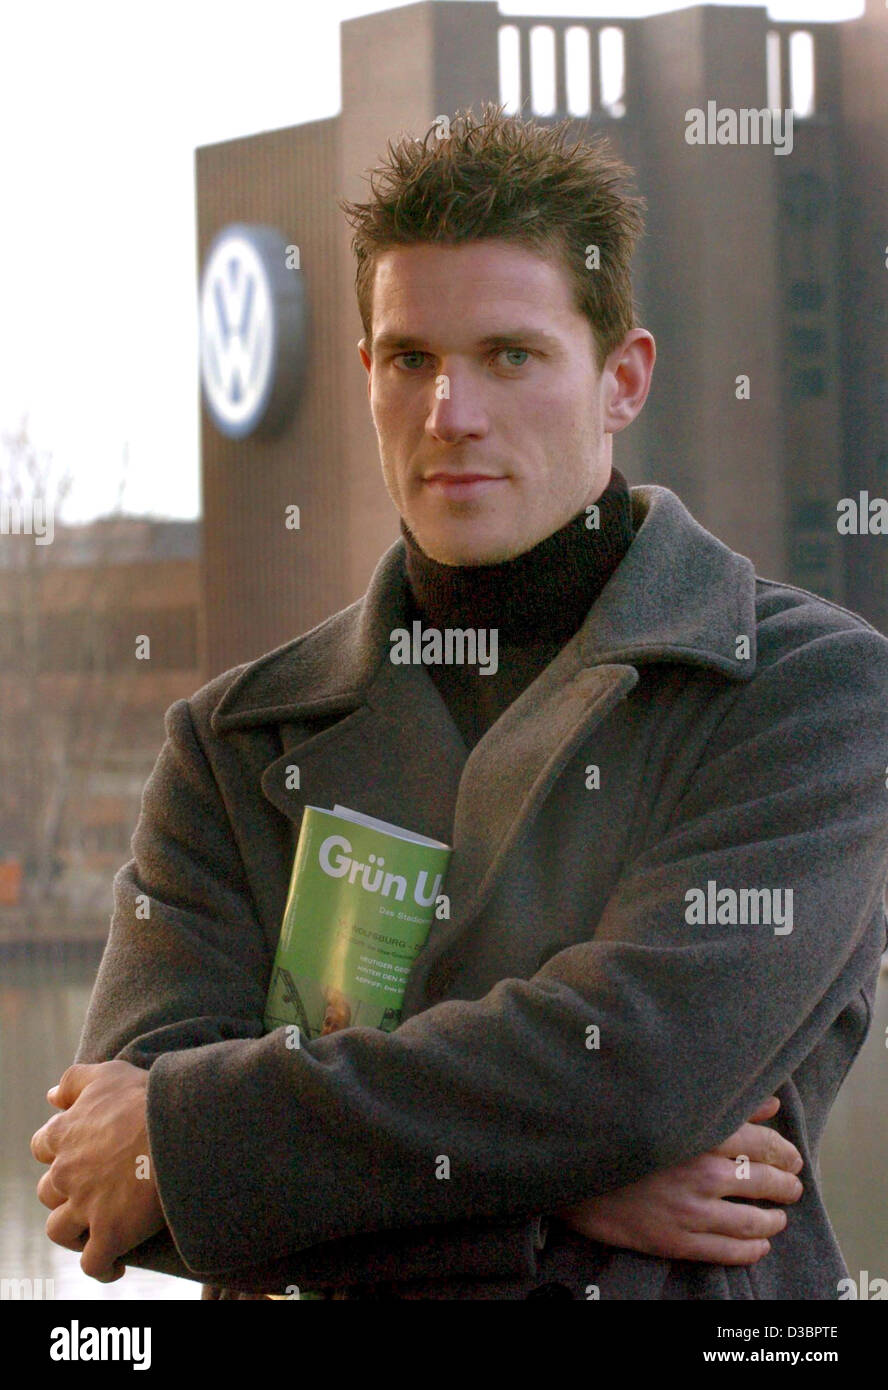 (dpa) - Belgian national team player Peter van der Heyden holds up the official club magazine 'Gruen und Gut' (green and good) of his future team VFL Wolfsburg in Wolfsburg, Germany, 28 December 2004. Van der Heyden, who currently plays for Belgium's FC Brugge, will join the Bundesliga side for the  Stock Photo